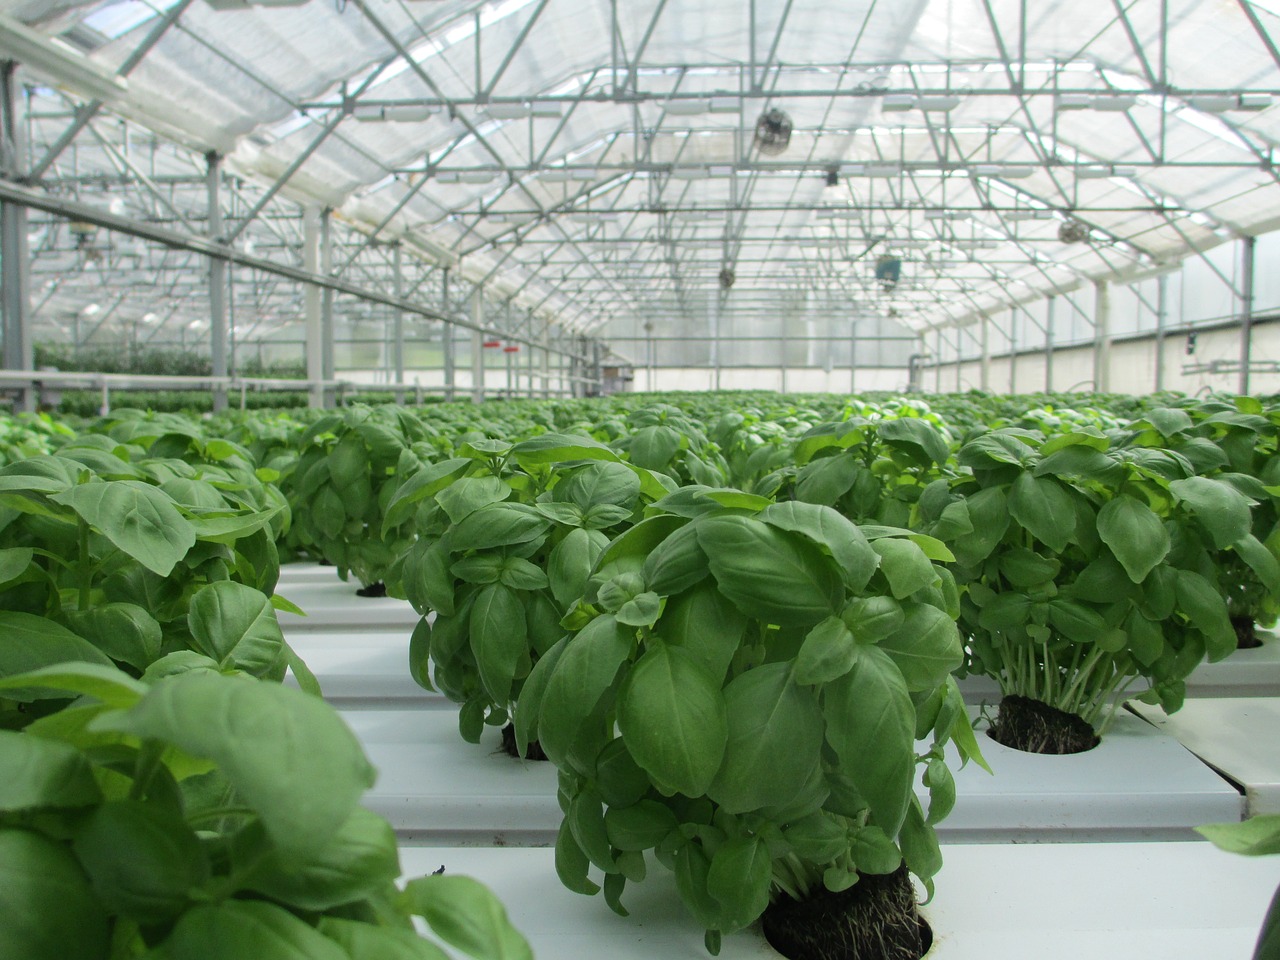 Smart Fog commercial greenhouse humidifier use micron droplet technology to eliminate toxins and provide precise levels of humidity.